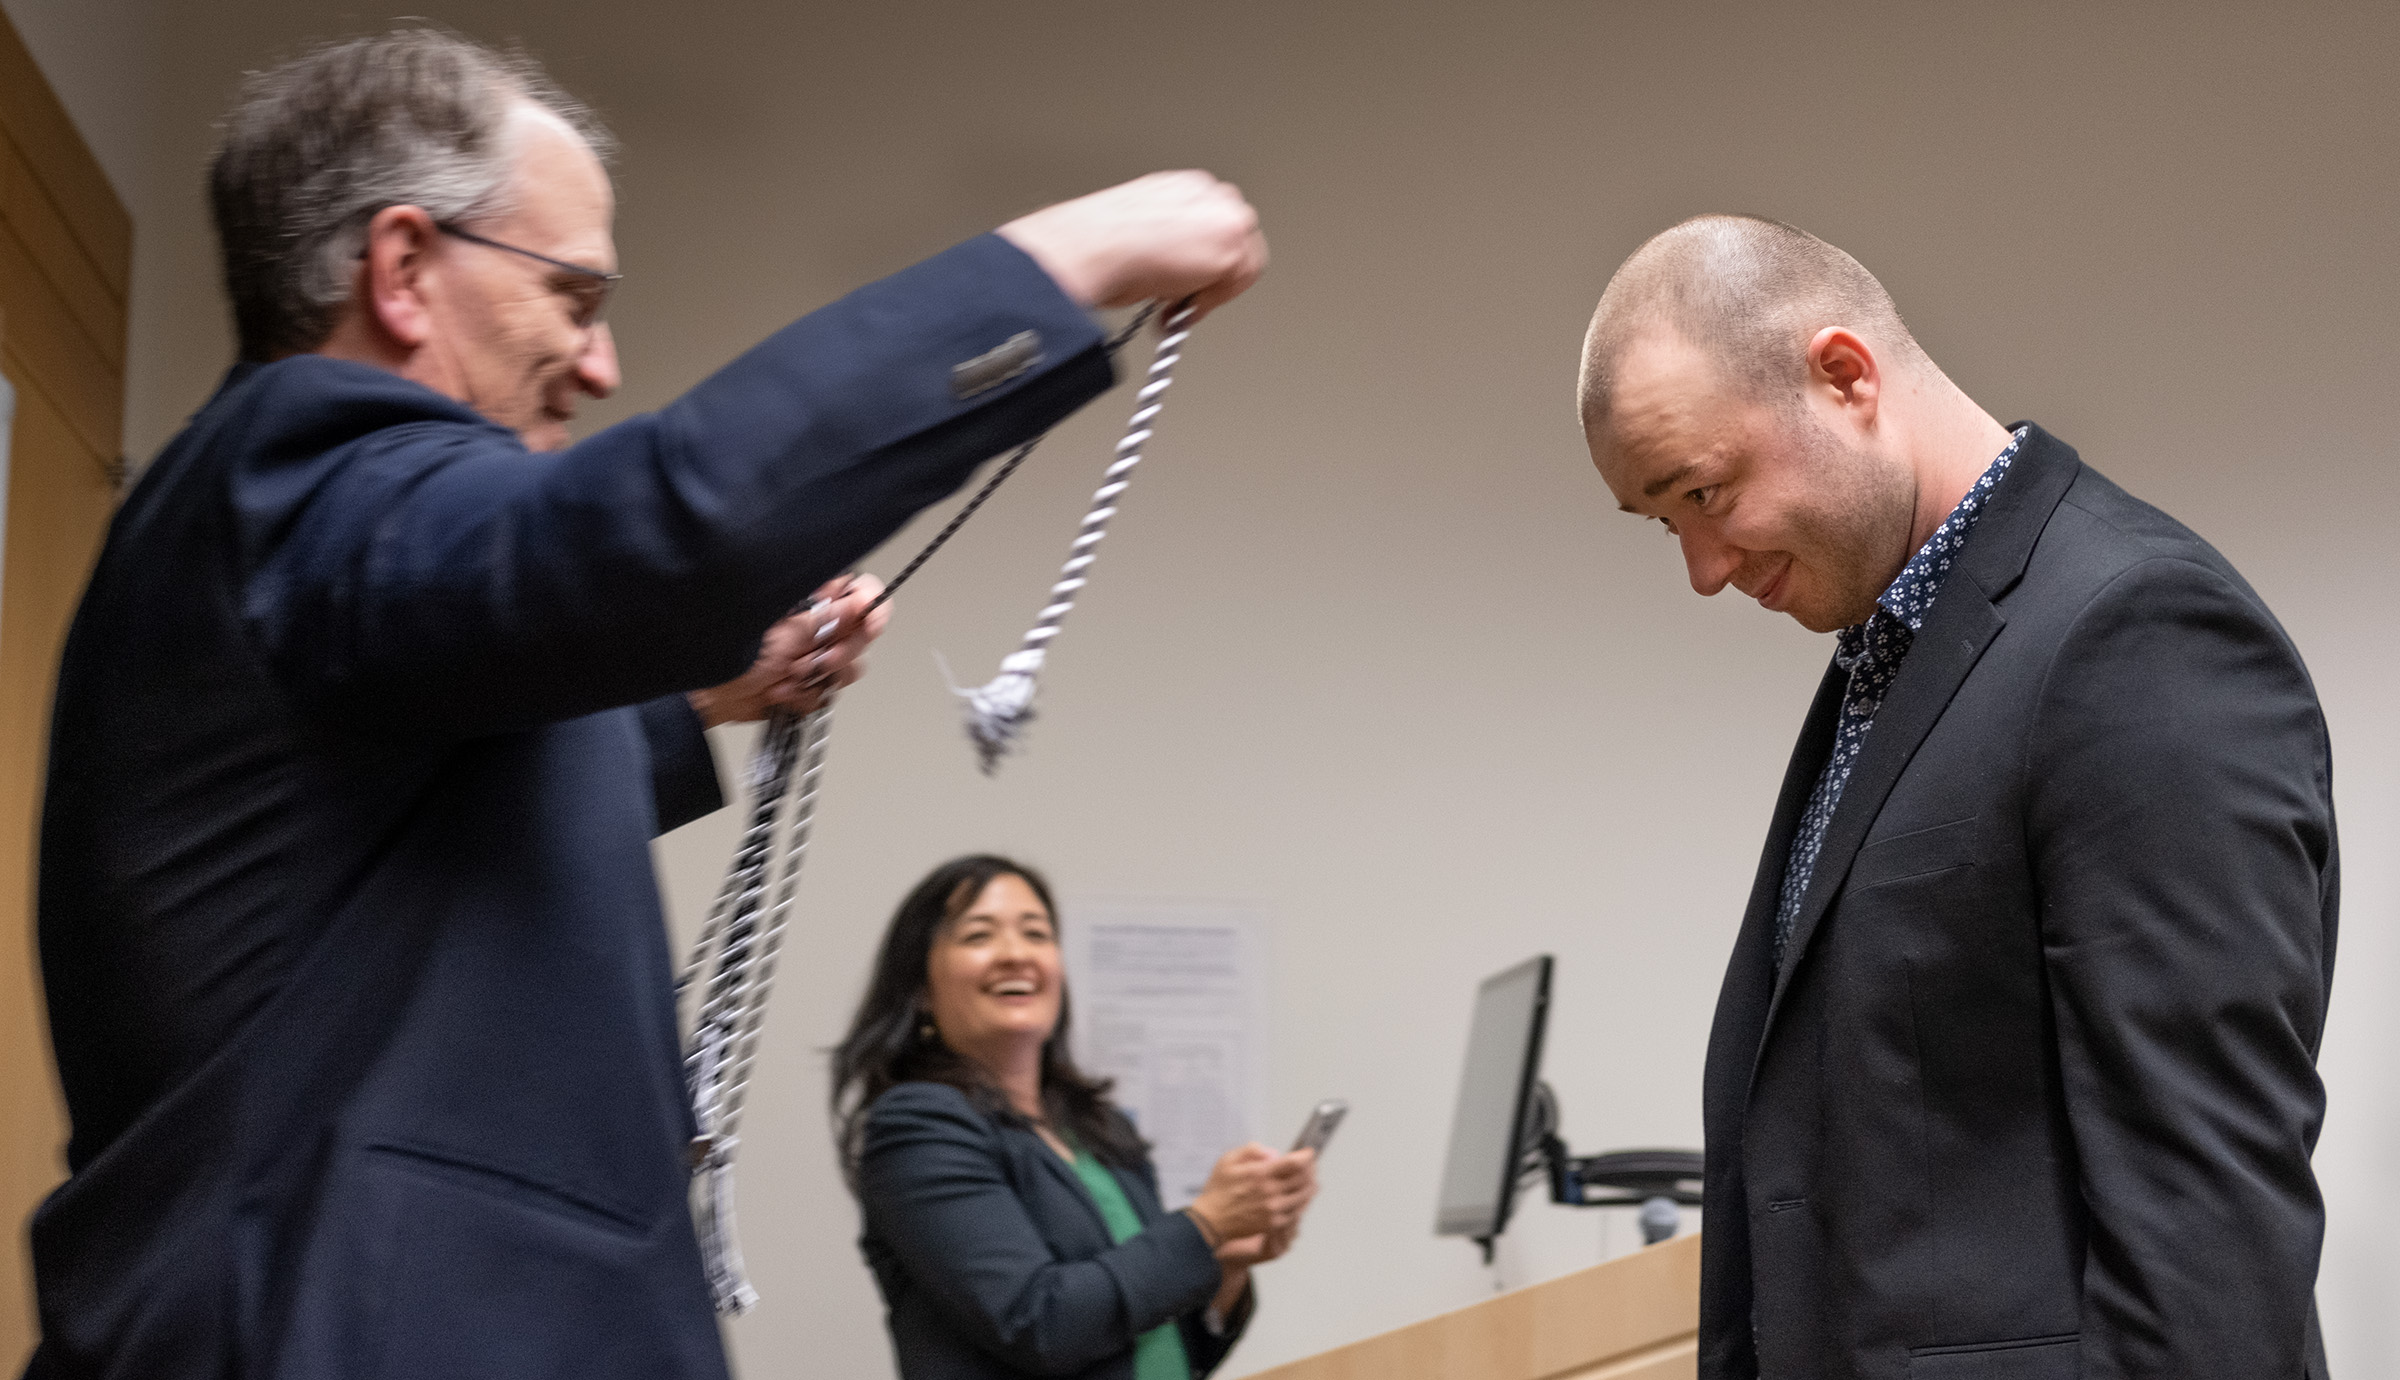 Prof. Mike Stanton drapes a honor cord around the neck of senior journalism major Hudson Kamphausen as Department Head Marie Shanahan looks on.